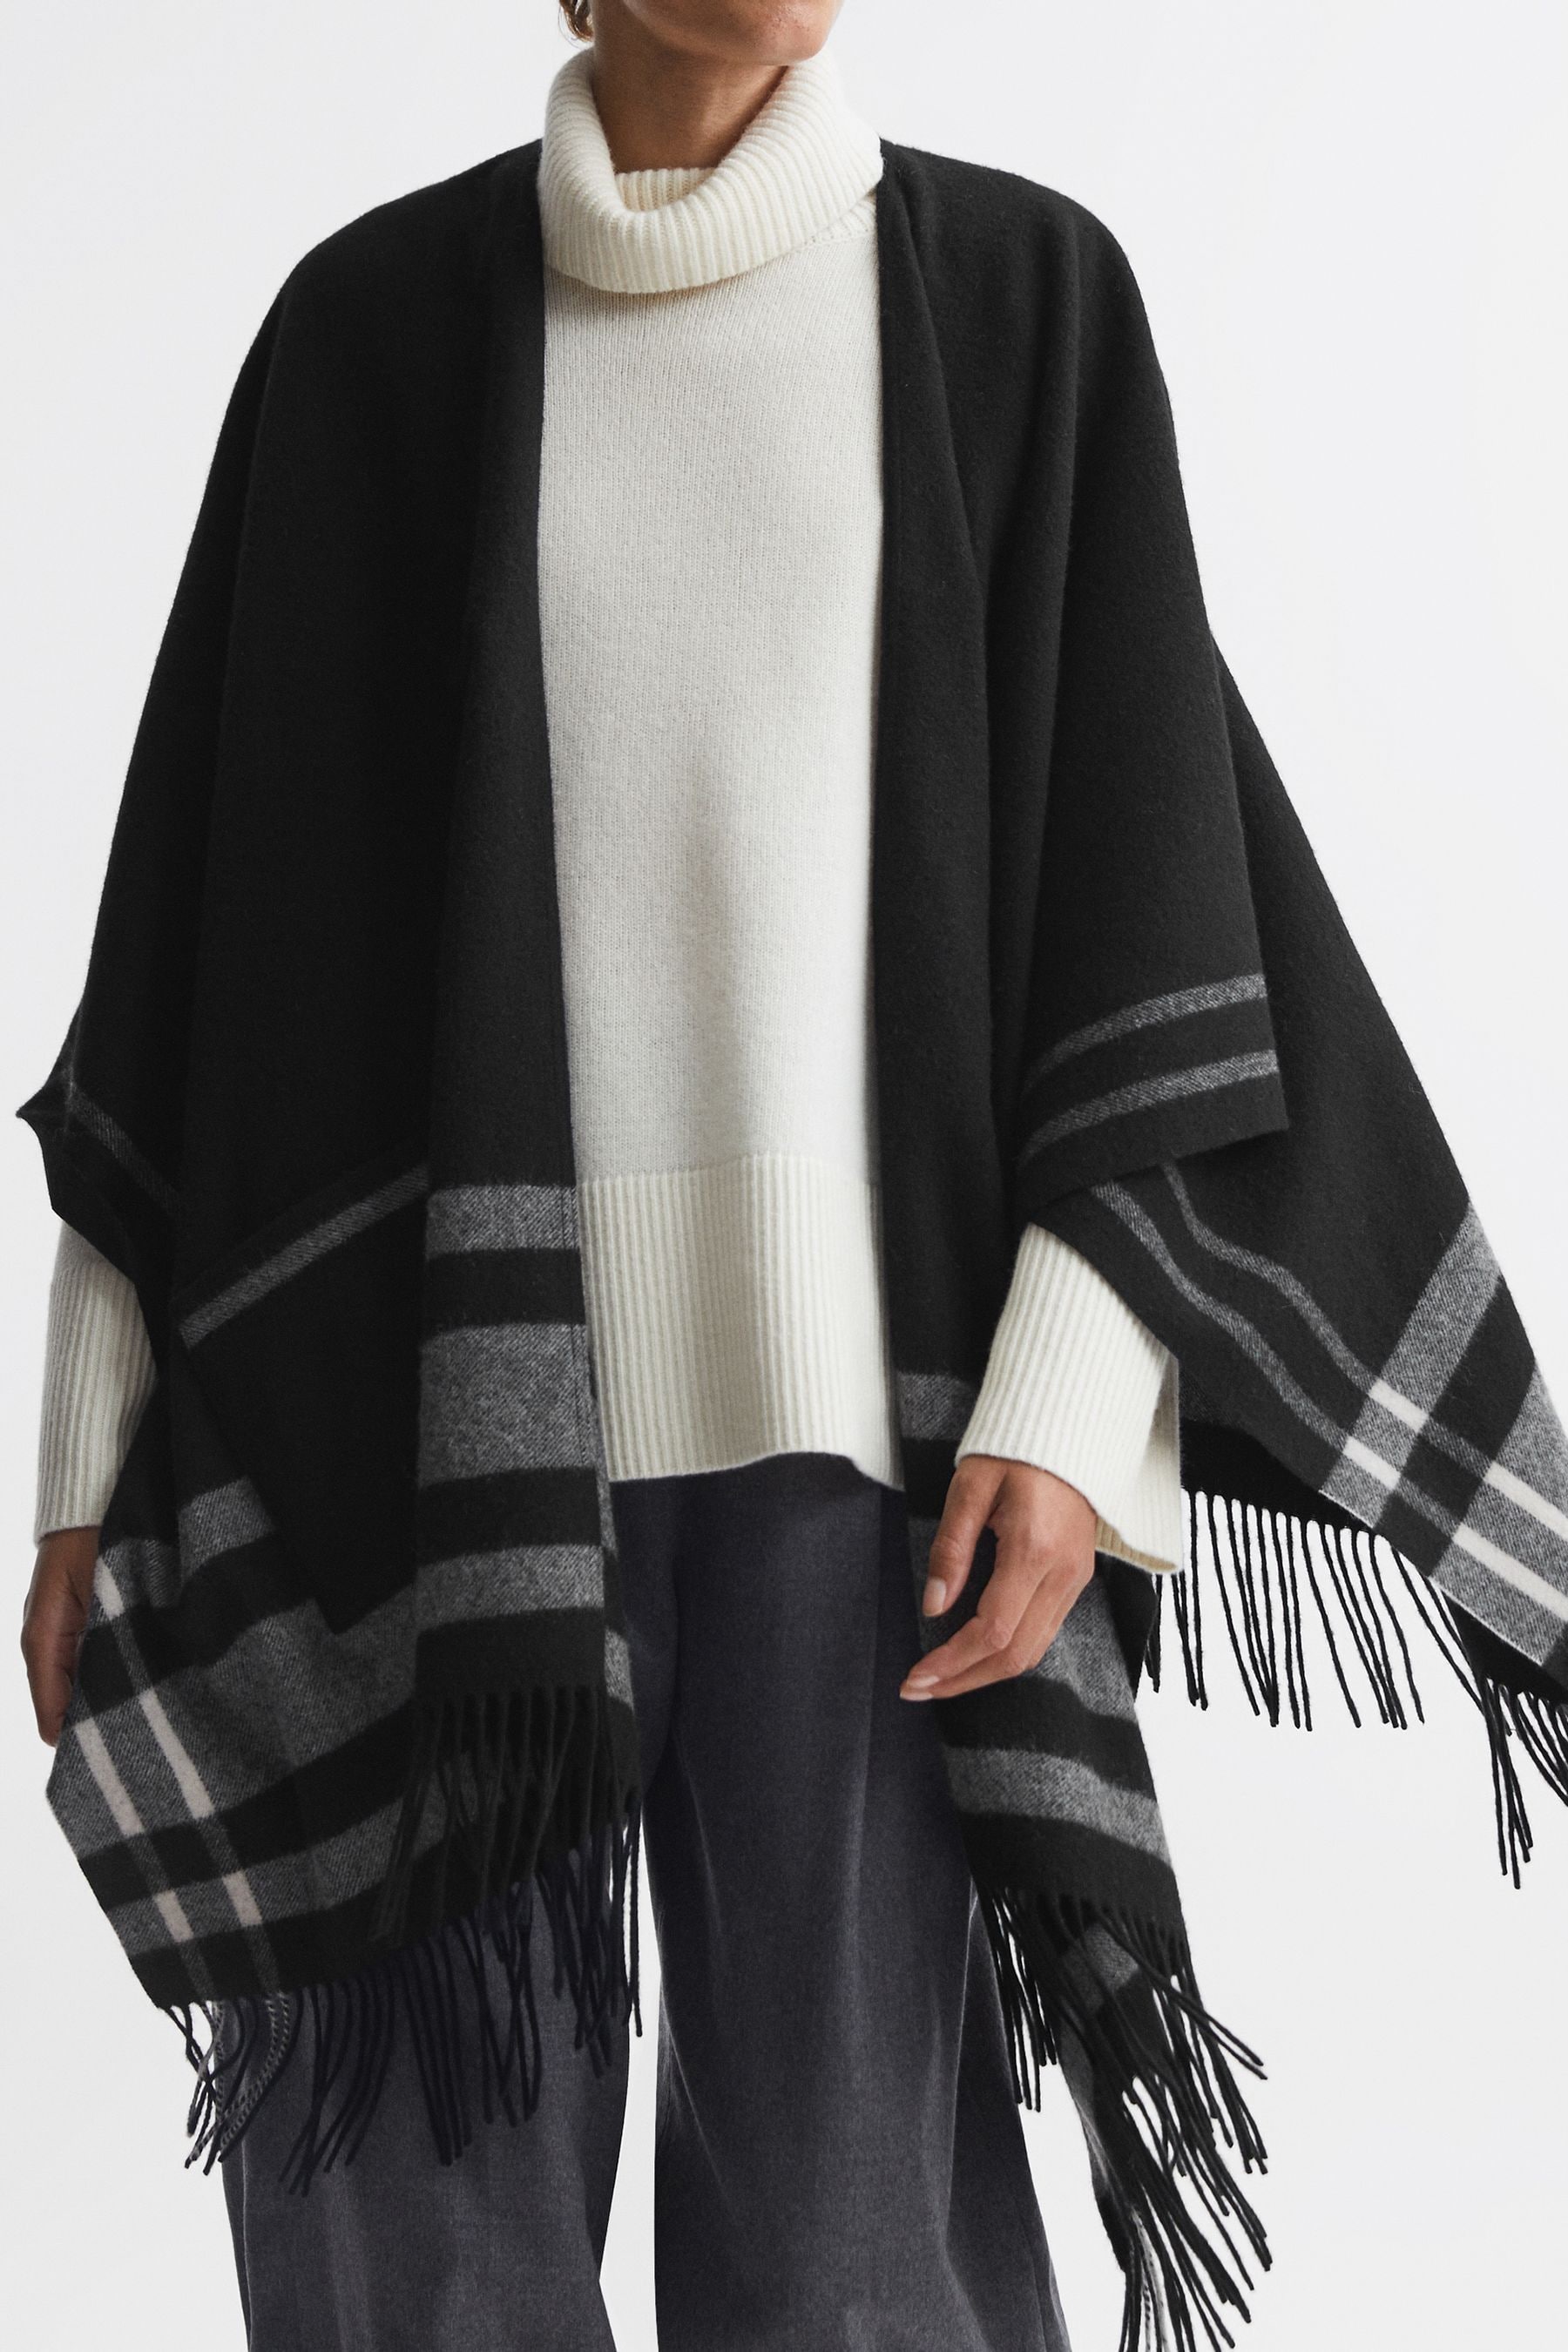 REISS CATALINA - BLACK WOOL STRIPED CAPE, ONE